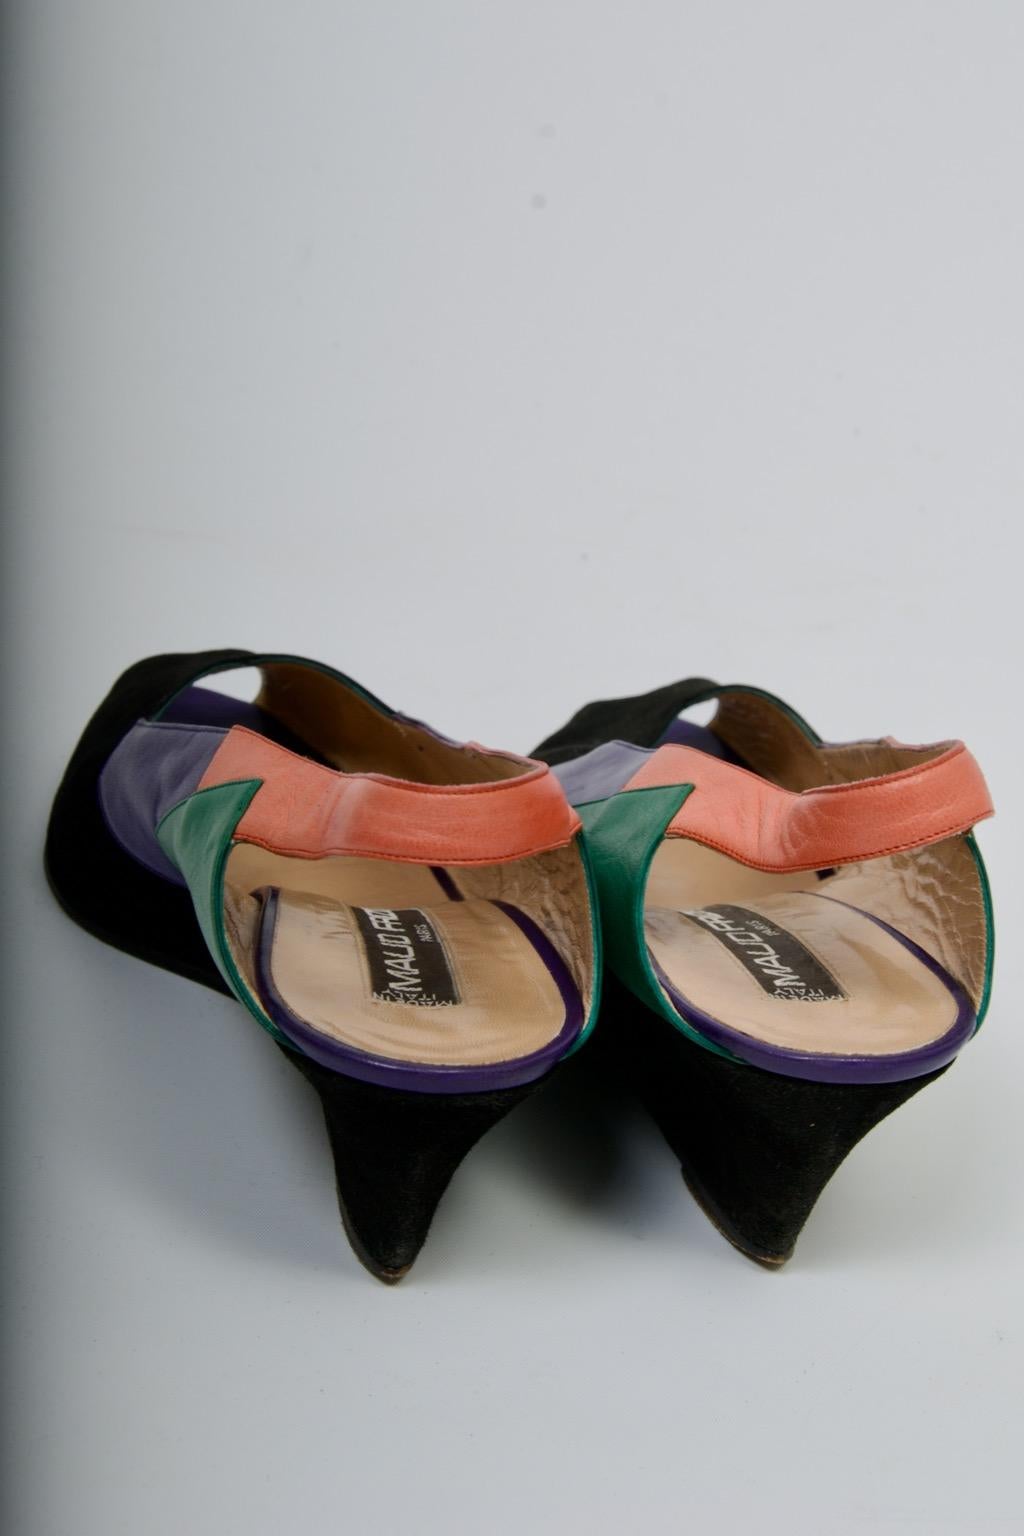 Maud Frizon Multi Suede Wedge Slingbacks In Good Condition For Sale In Alford, MA